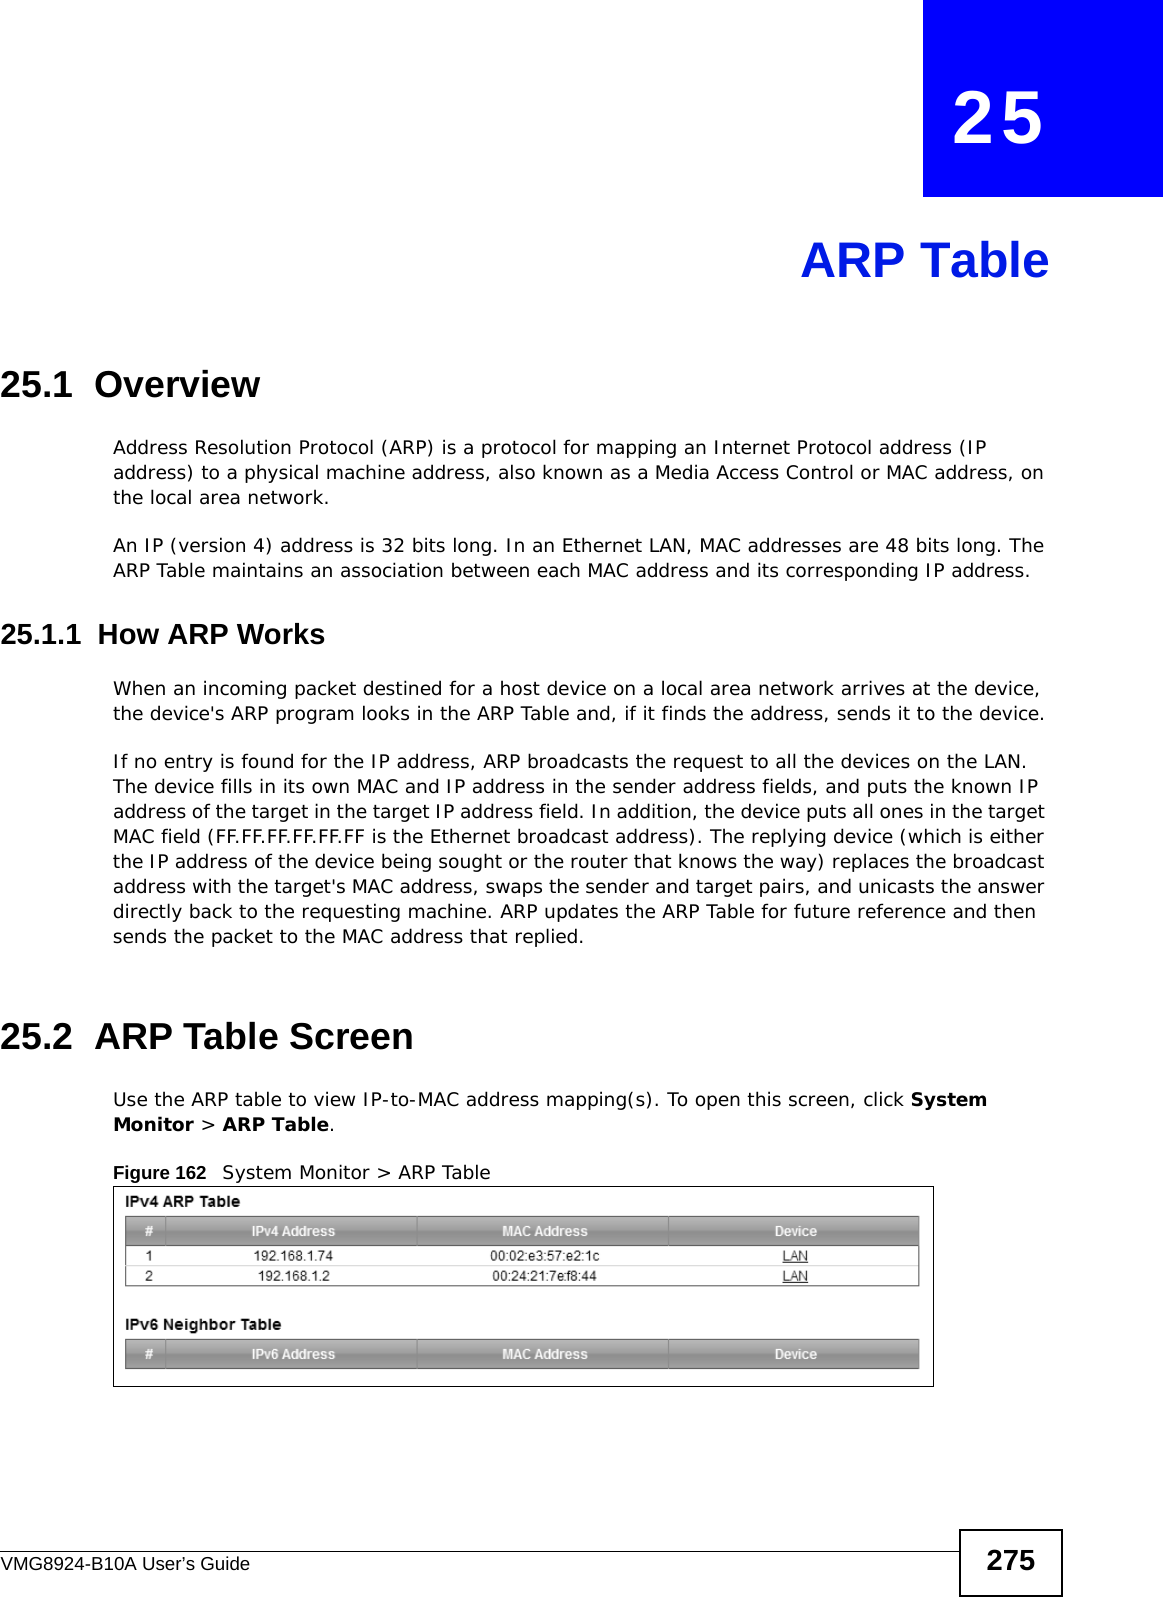 VMG8924-B10A User’s Guide 275CHAPTER   25ARP Table25.1  OverviewAddress Resolution Protocol (ARP) is a protocol for mapping an Internet Protocol address (IP address) to a physical machine address, also known as a Media Access Control or MAC address, on the local area network. An IP (version 4) address is 32 bits long. In an Ethernet LAN, MAC addresses are 48 bits long. The ARP Table maintains an association between each MAC address and its corresponding IP address.25.1.1  How ARP WorksWhen an incoming packet destined for a host device on a local area network arrives at the device, the device&apos;s ARP program looks in the ARP Table and, if it finds the address, sends it to the device.If no entry is found for the IP address, ARP broadcasts the request to all the devices on the LAN. The device fills in its own MAC and IP address in the sender address fields, and puts the known IP address of the target in the target IP address field. In addition, the device puts all ones in the target MAC field (FF.FF.FF.FF.FF.FF is the Ethernet broadcast address). The replying device (which is either the IP address of the device being sought or the router that knows the way) replaces the broadcast address with the target&apos;s MAC address, swaps the sender and target pairs, and unicasts the answer directly back to the requesting machine. ARP updates the ARP Table for future reference and then sends the packet to the MAC address that replied. 25.2  ARP Table ScreenUse the ARP table to view IP-to-MAC address mapping(s). To open this screen, click System Monitor &gt; ARP Table.Figure 162   System Monitor &gt; ARP Table